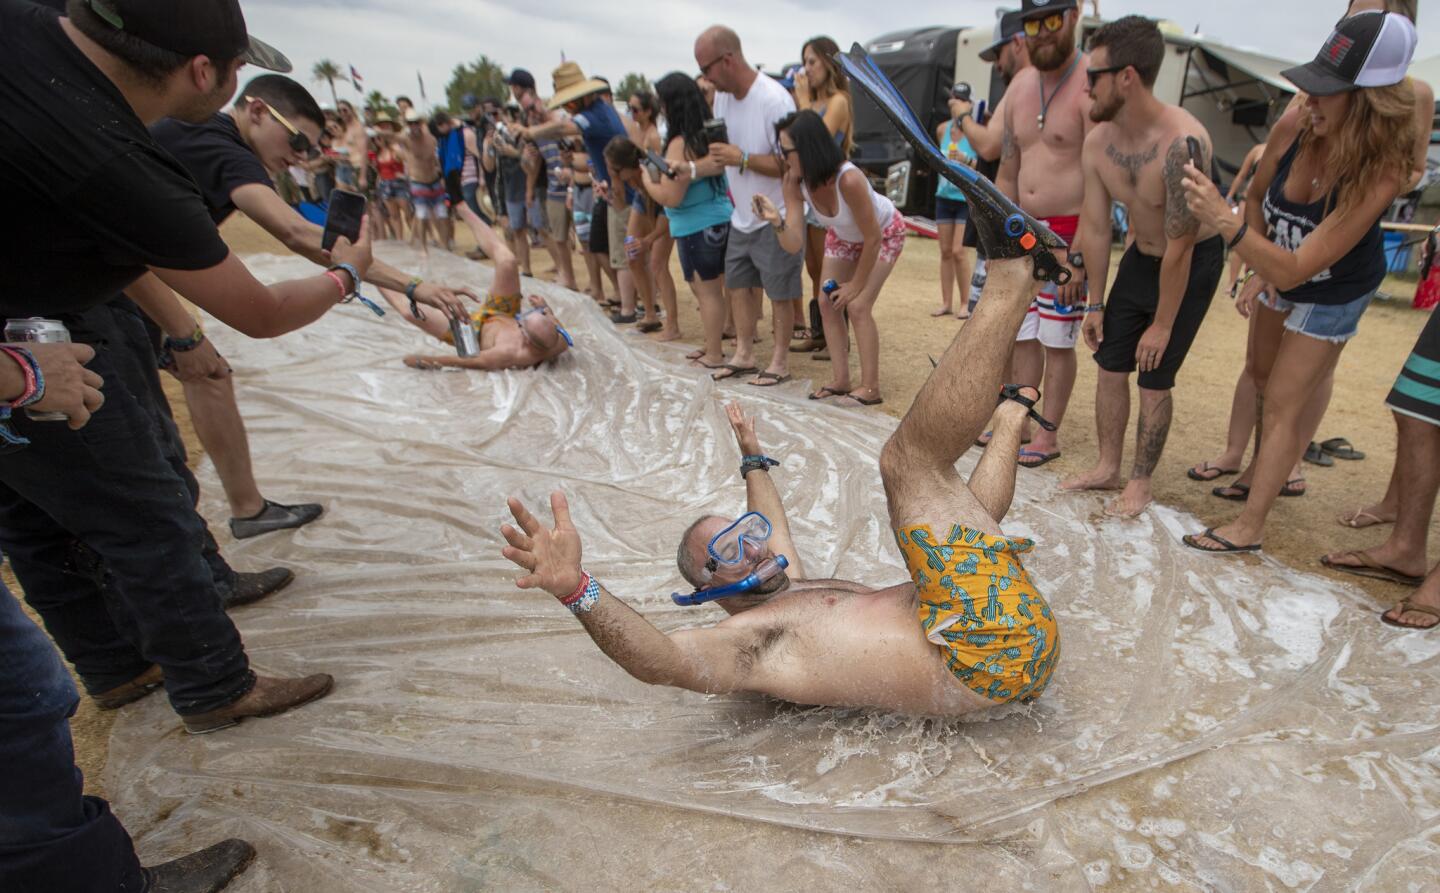 Before the bands started playing, people take turns on a giant slip-n-slide amid the crowd in the RV Resort on the final day of the three-day 2019 Stagecoach Country Music Festival.